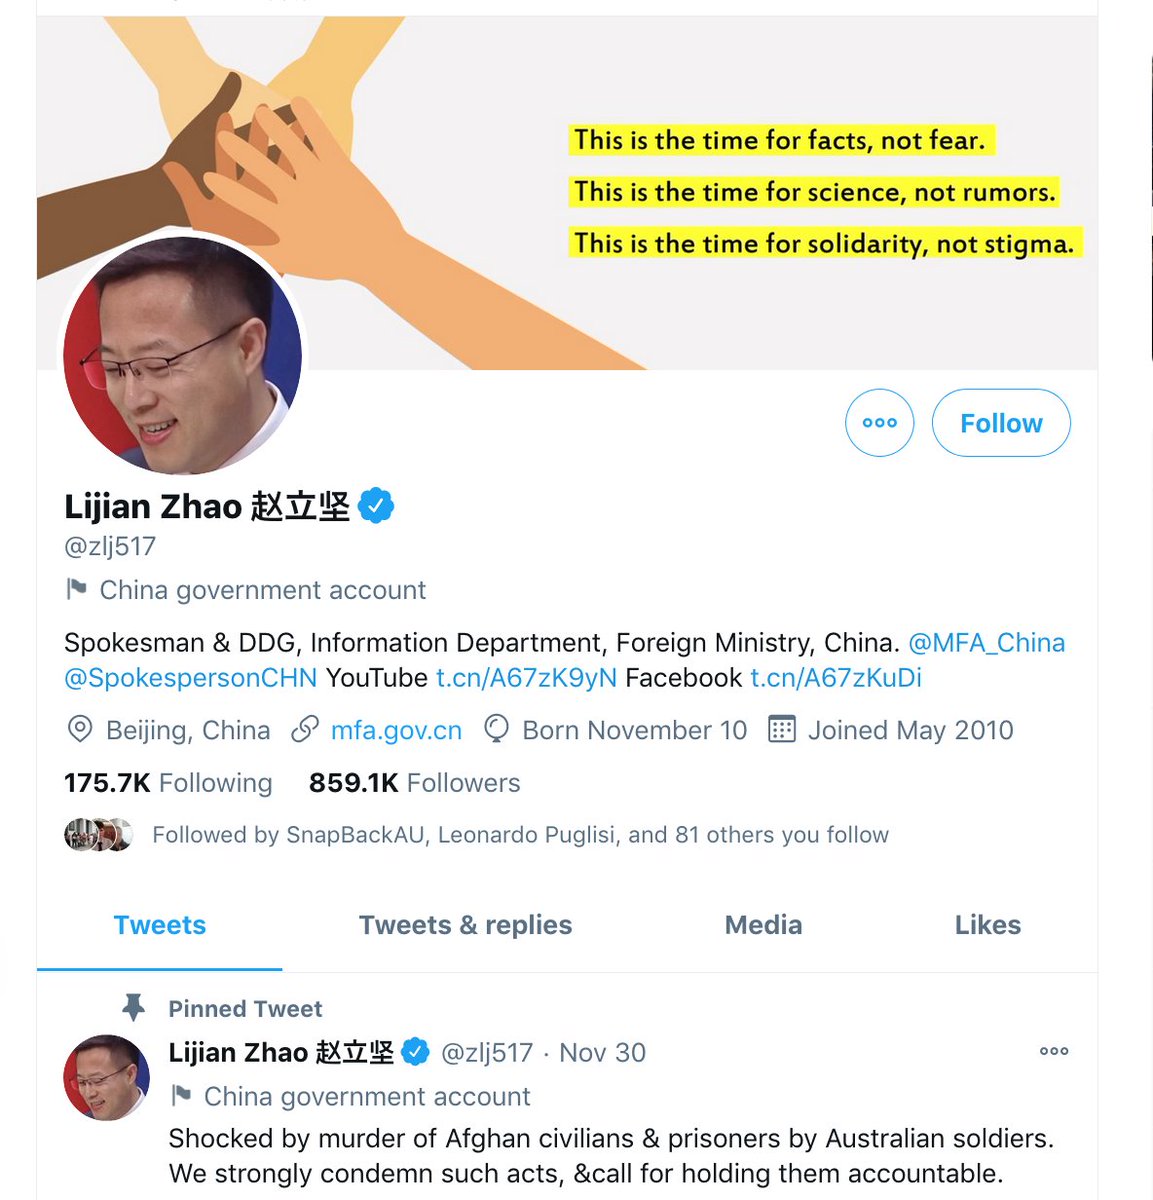 Then I'd get a high profile Chinese politician - one who's followed by lots of foreign media - to launch it on social media (followed up by an army of 50 cent bots on all the socials).I'd fan it around a few foreign media outlets for good measure.